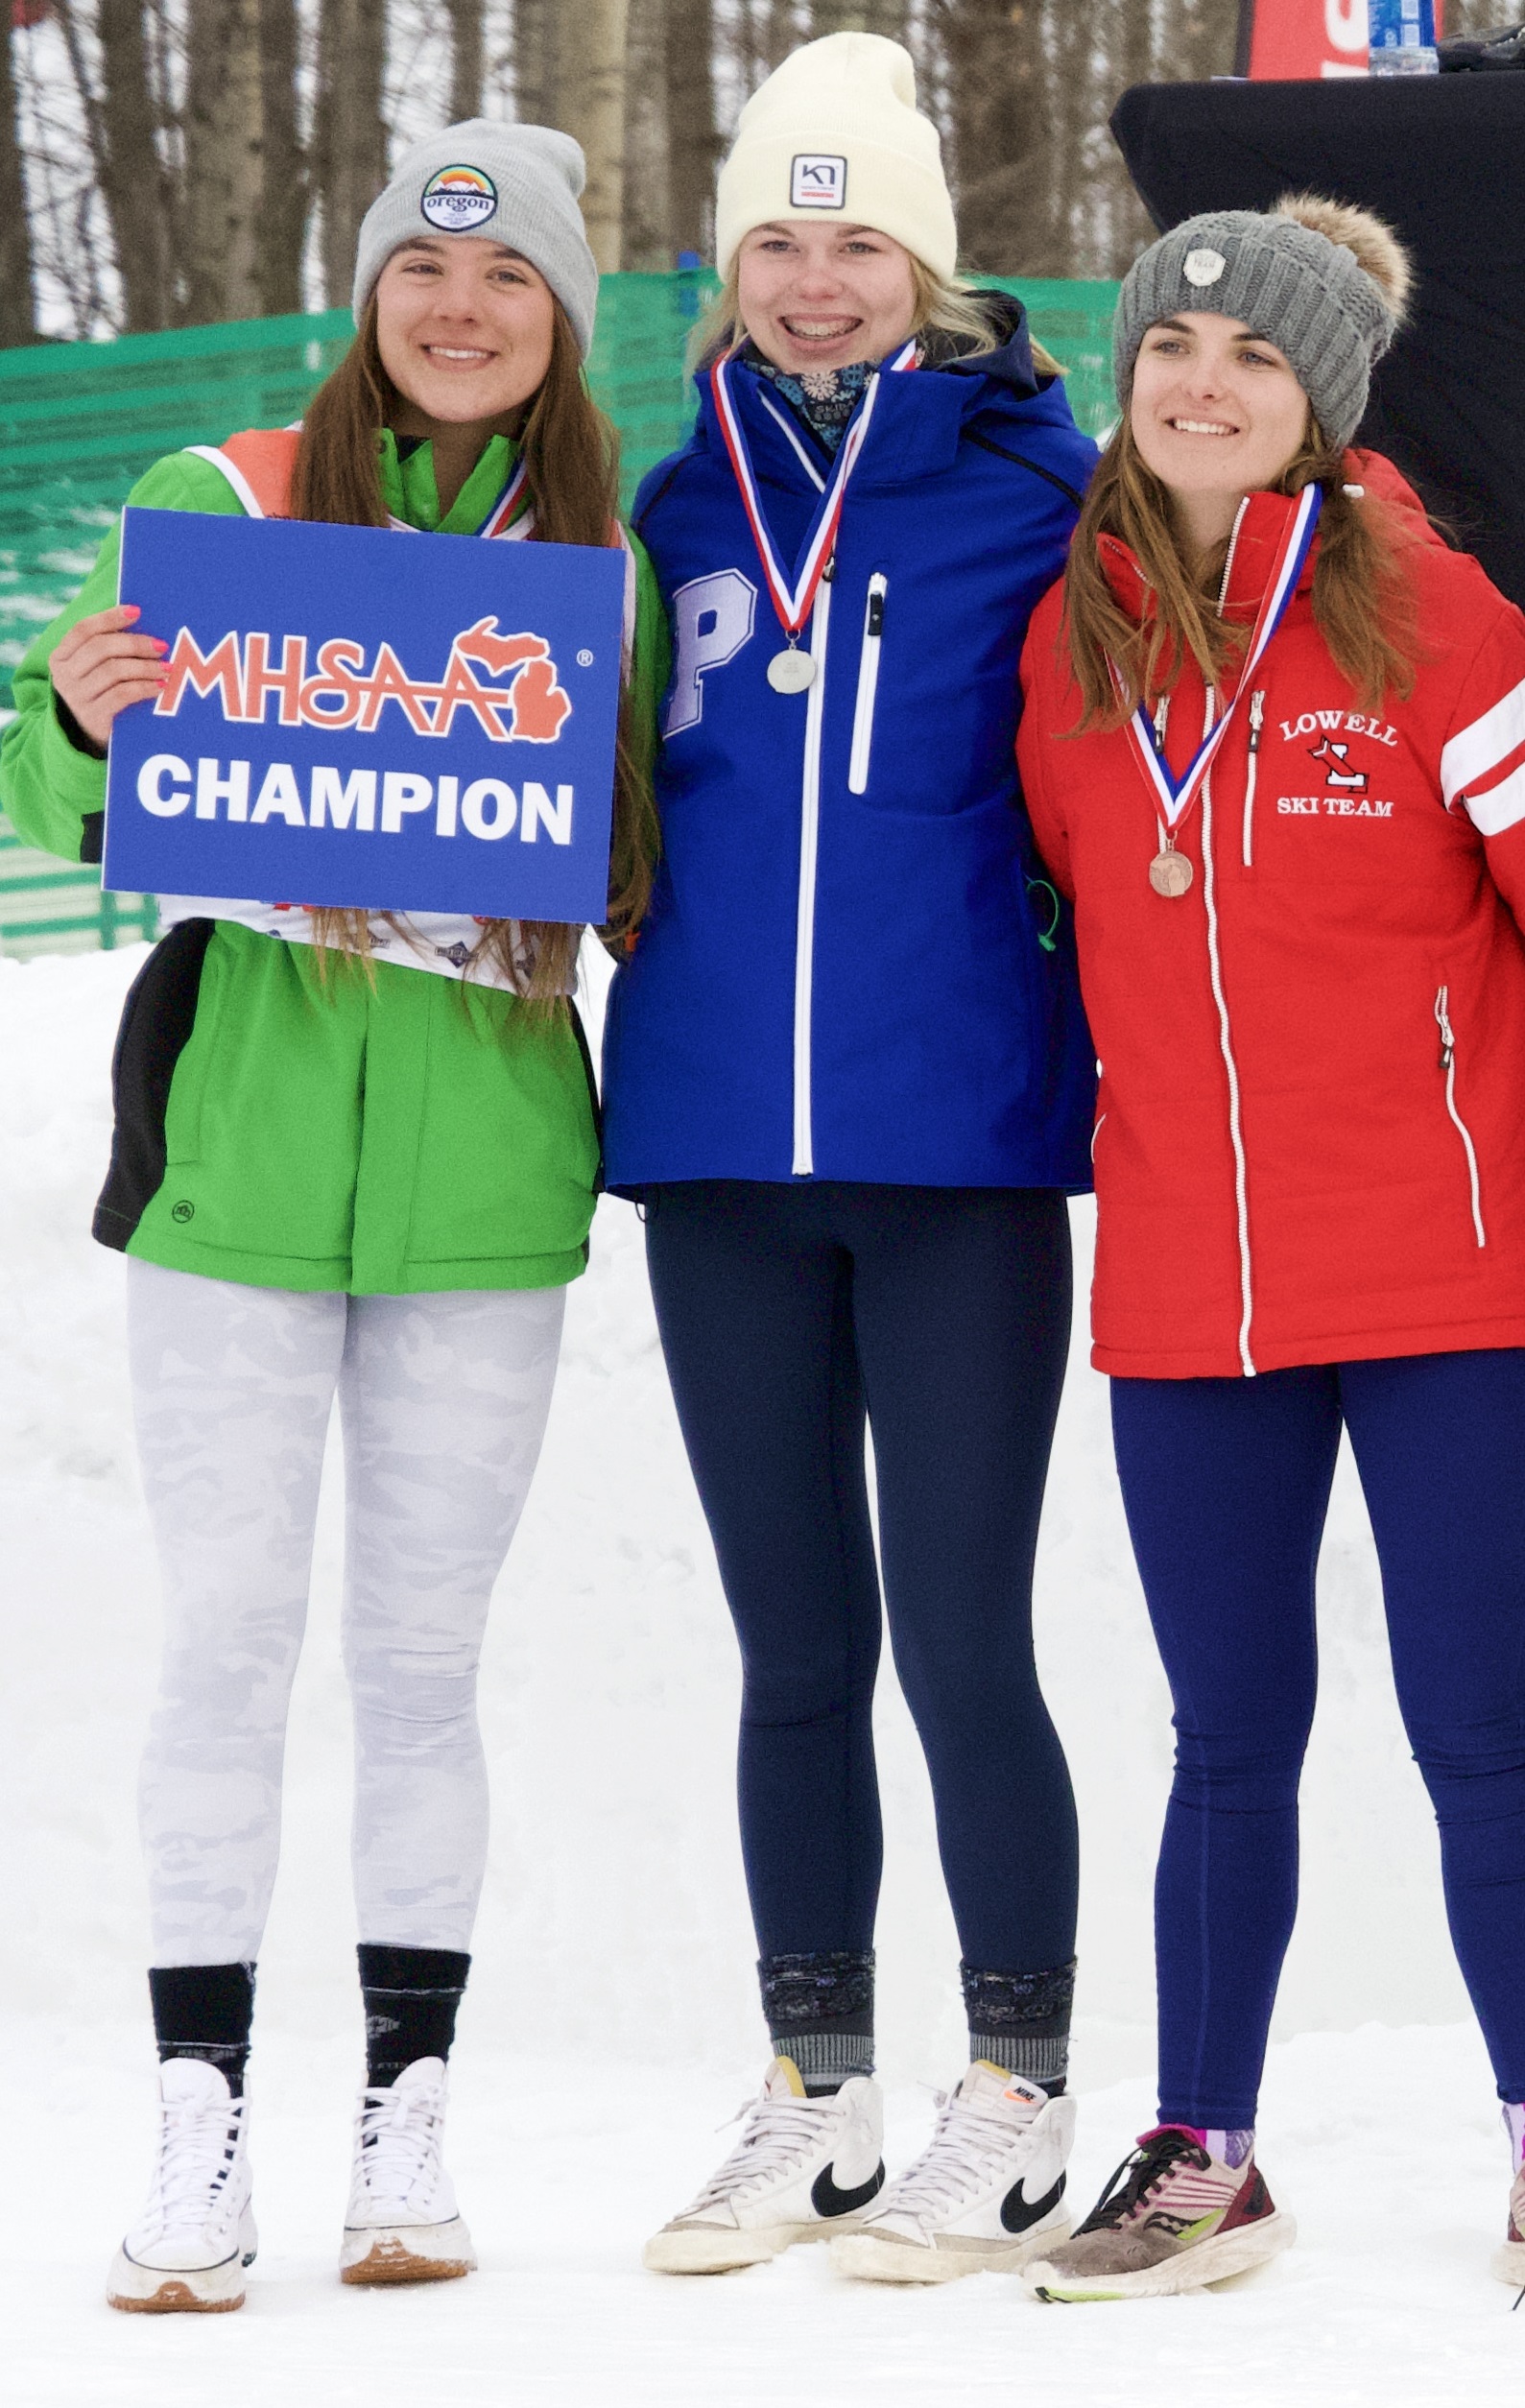  Schulte, far left and next to Petoskey’s Marley Spence and Lowell’s Kaylee Byrne, celebrates winning her second-straight slalom championship. 